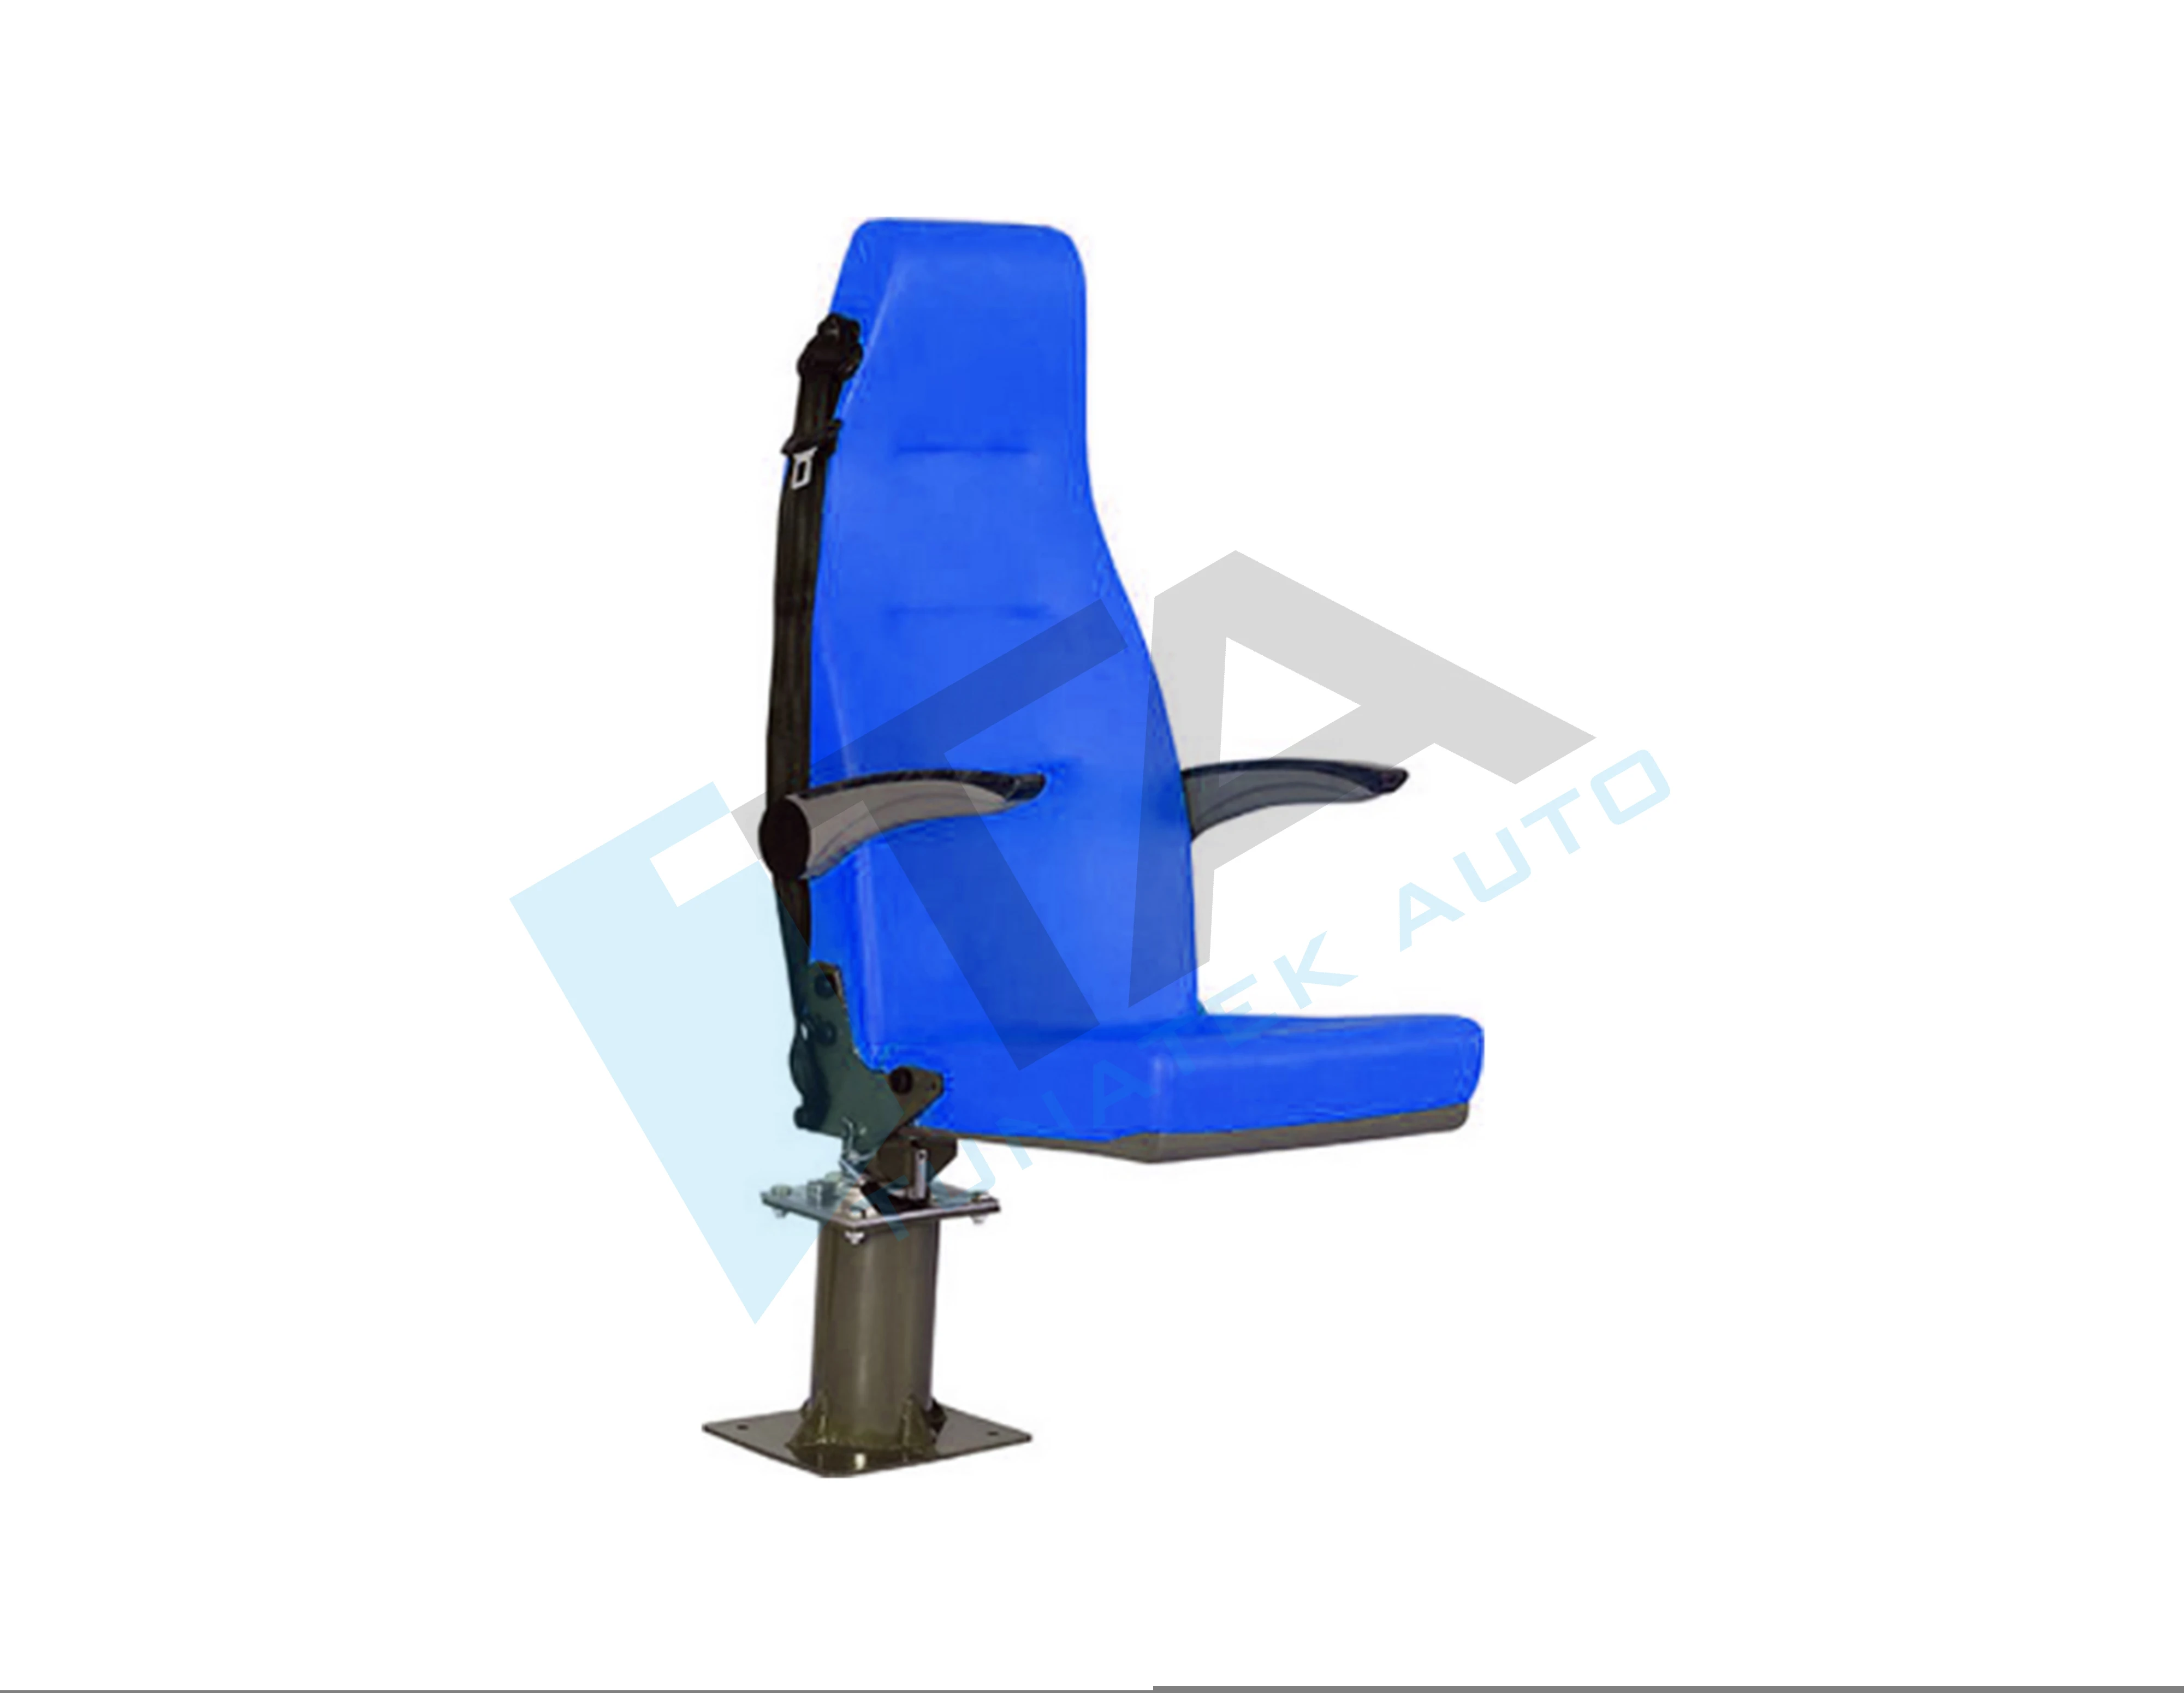 Folding Certificated Swivel Ambulance Seat with double arm rest 3 point seat belt